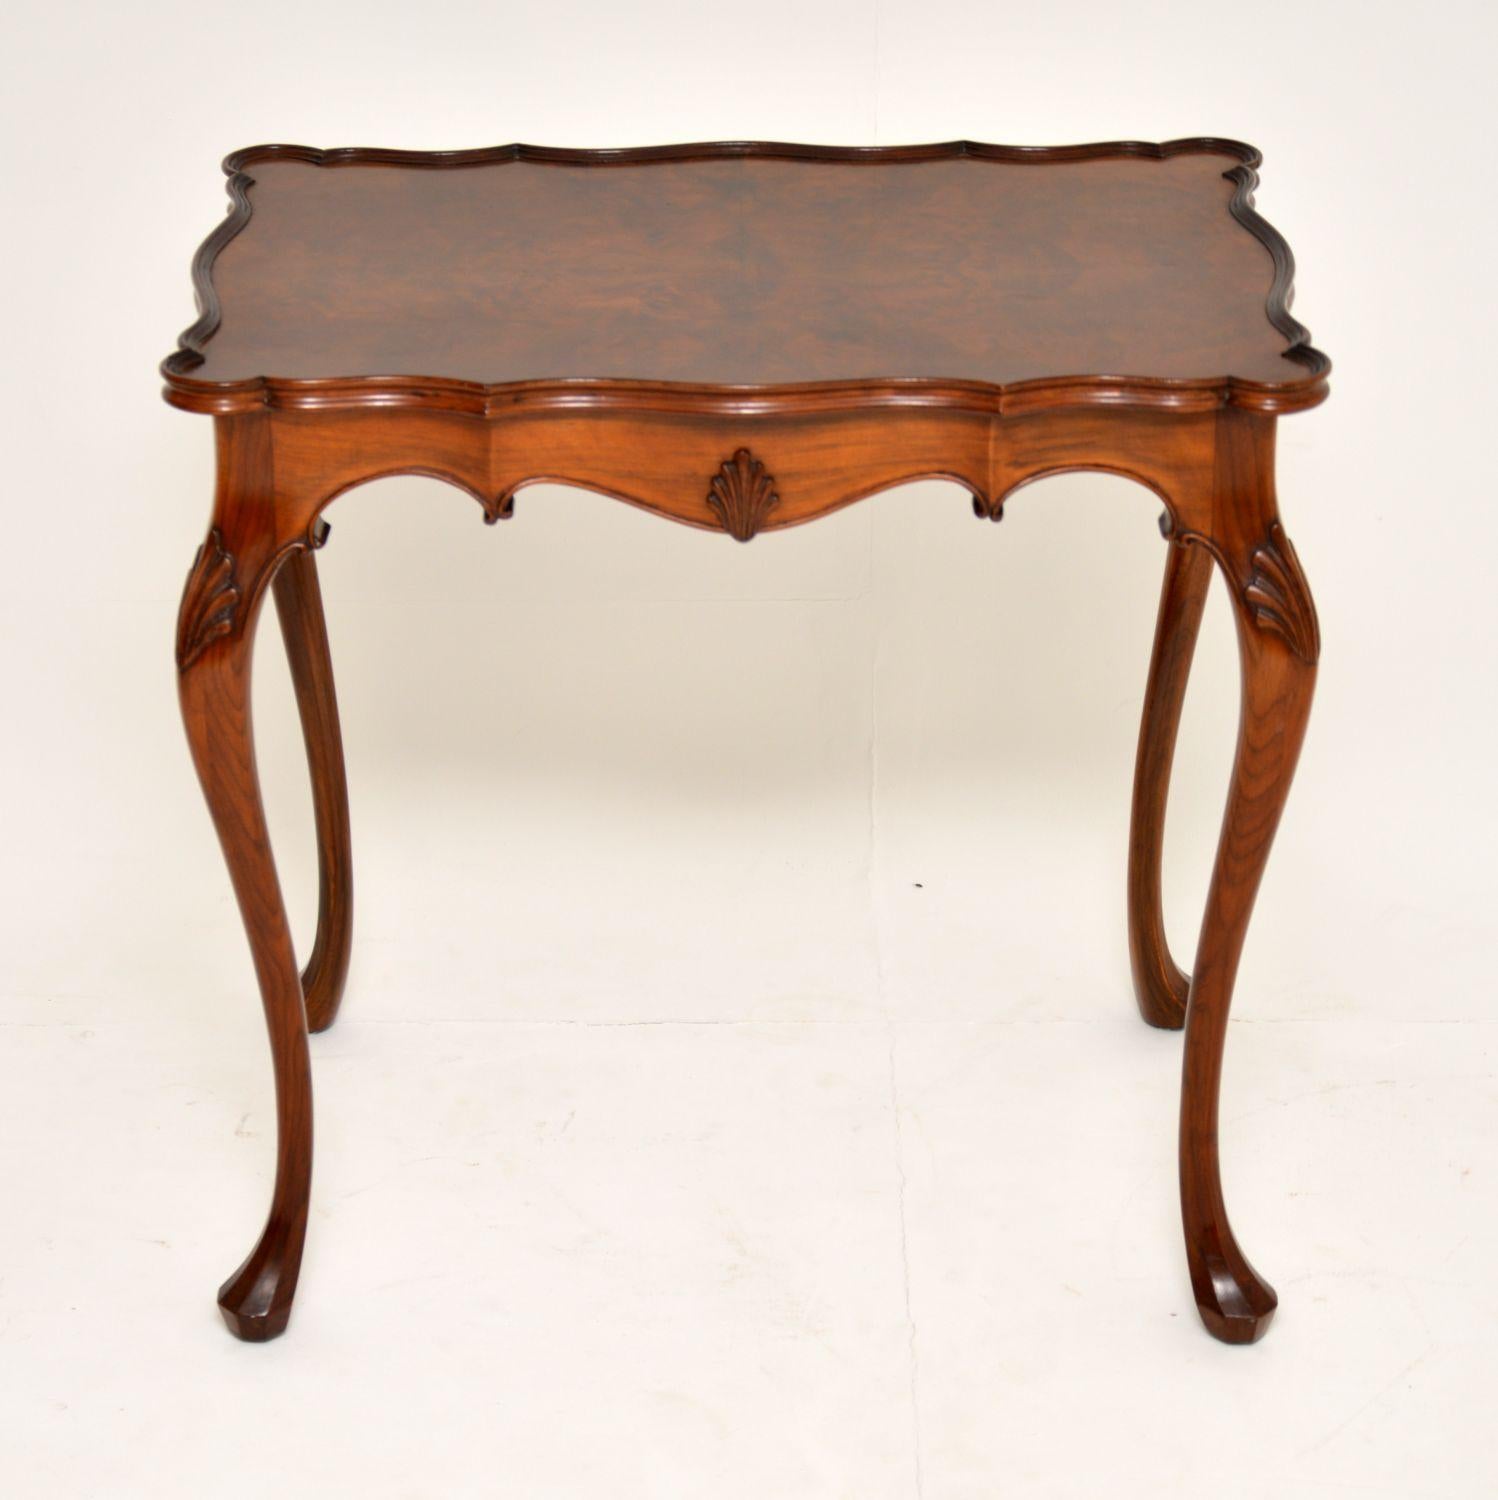 This is a superb quality walnut occasional table with a lovely shape and in excellent original condition, dating from the 1880s-1890s period. It has a burr walnut top with a pie crust edge. Below this is a solid walnut beautifully shaped border